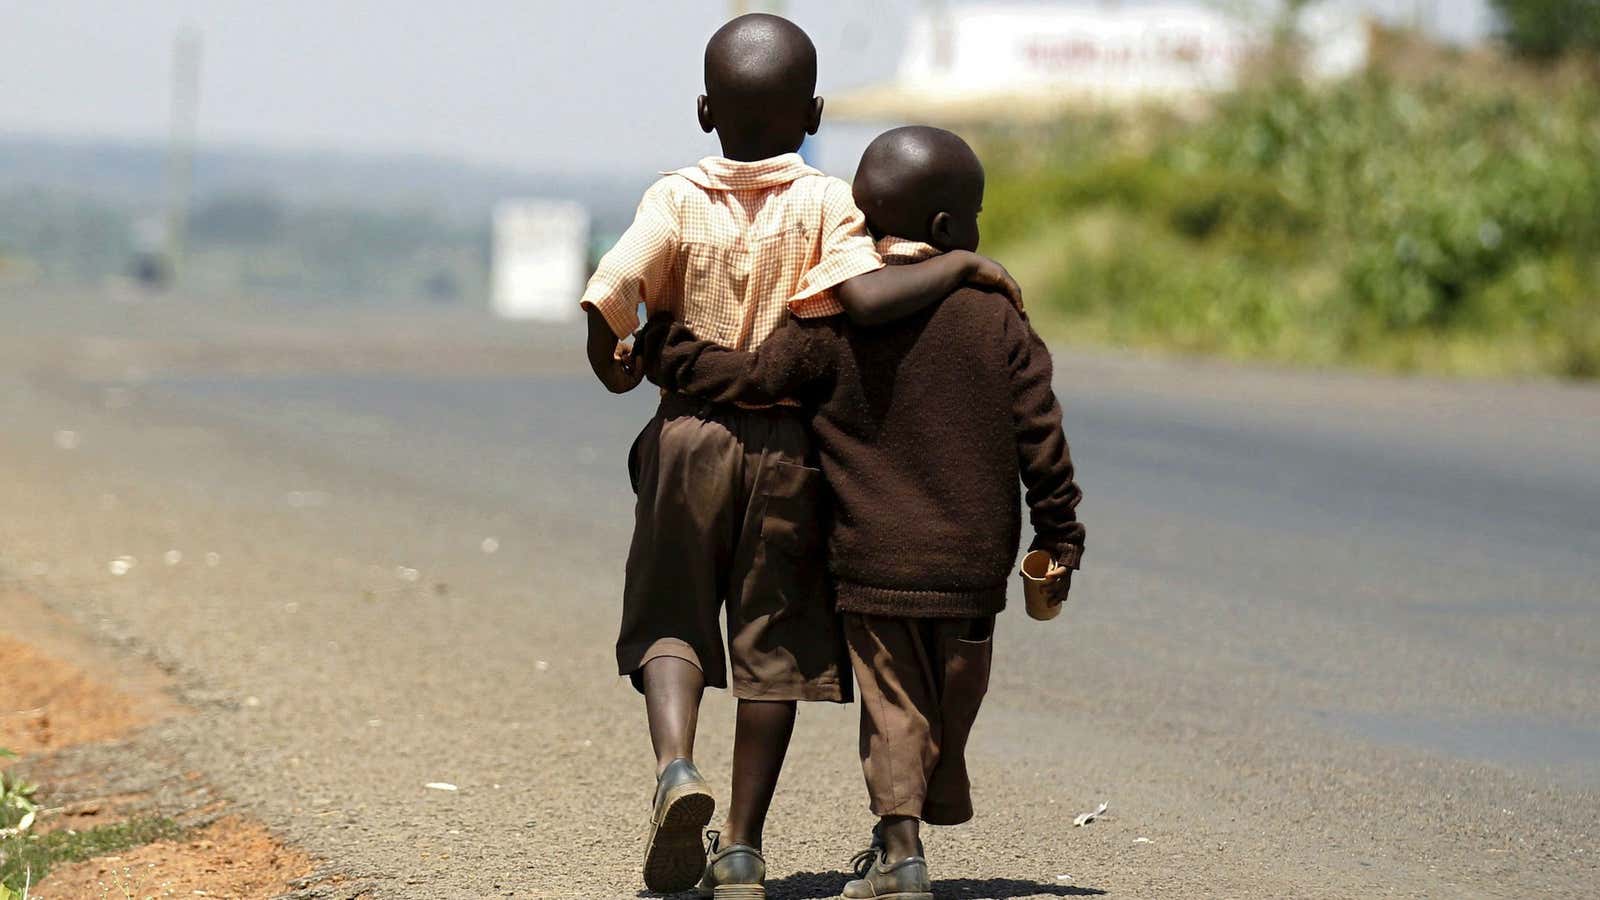 Boys in the village of Kogelo, the hometown of Obama’s father, walk home from school for lunch.